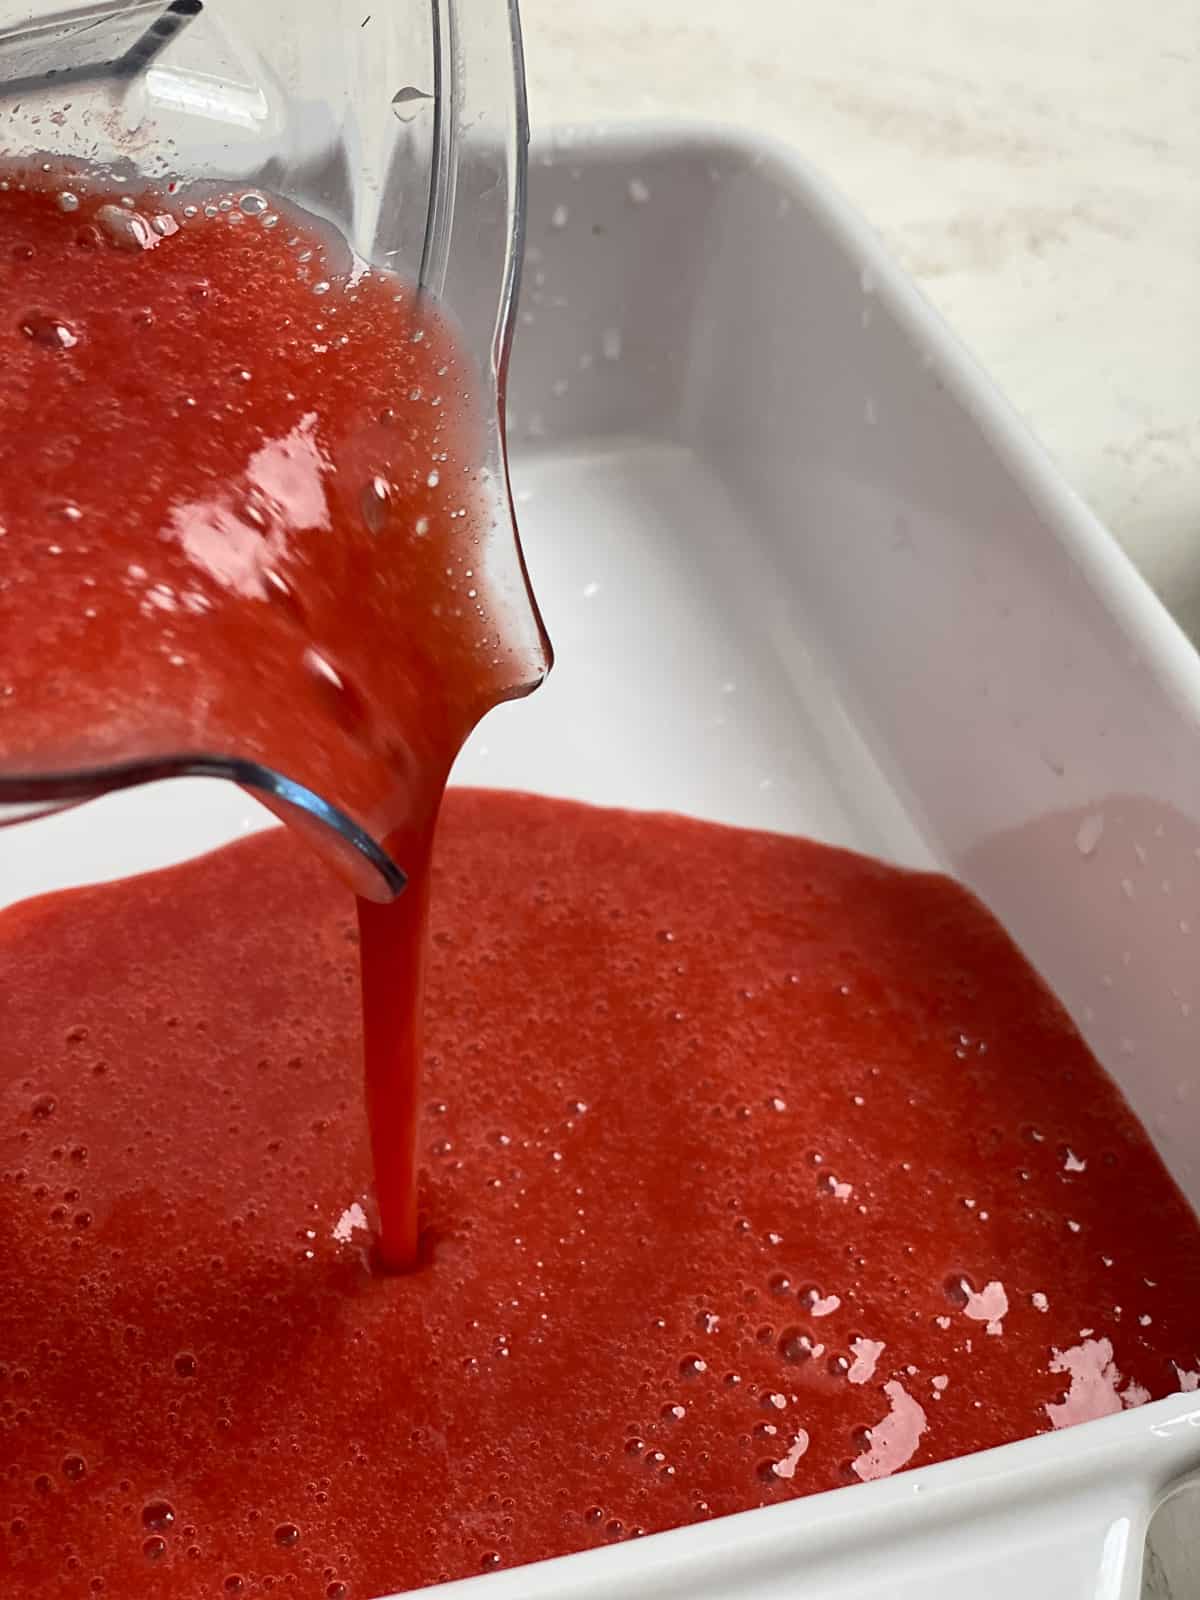 process of pureed strawberry sorbet mixture being poured into white tray